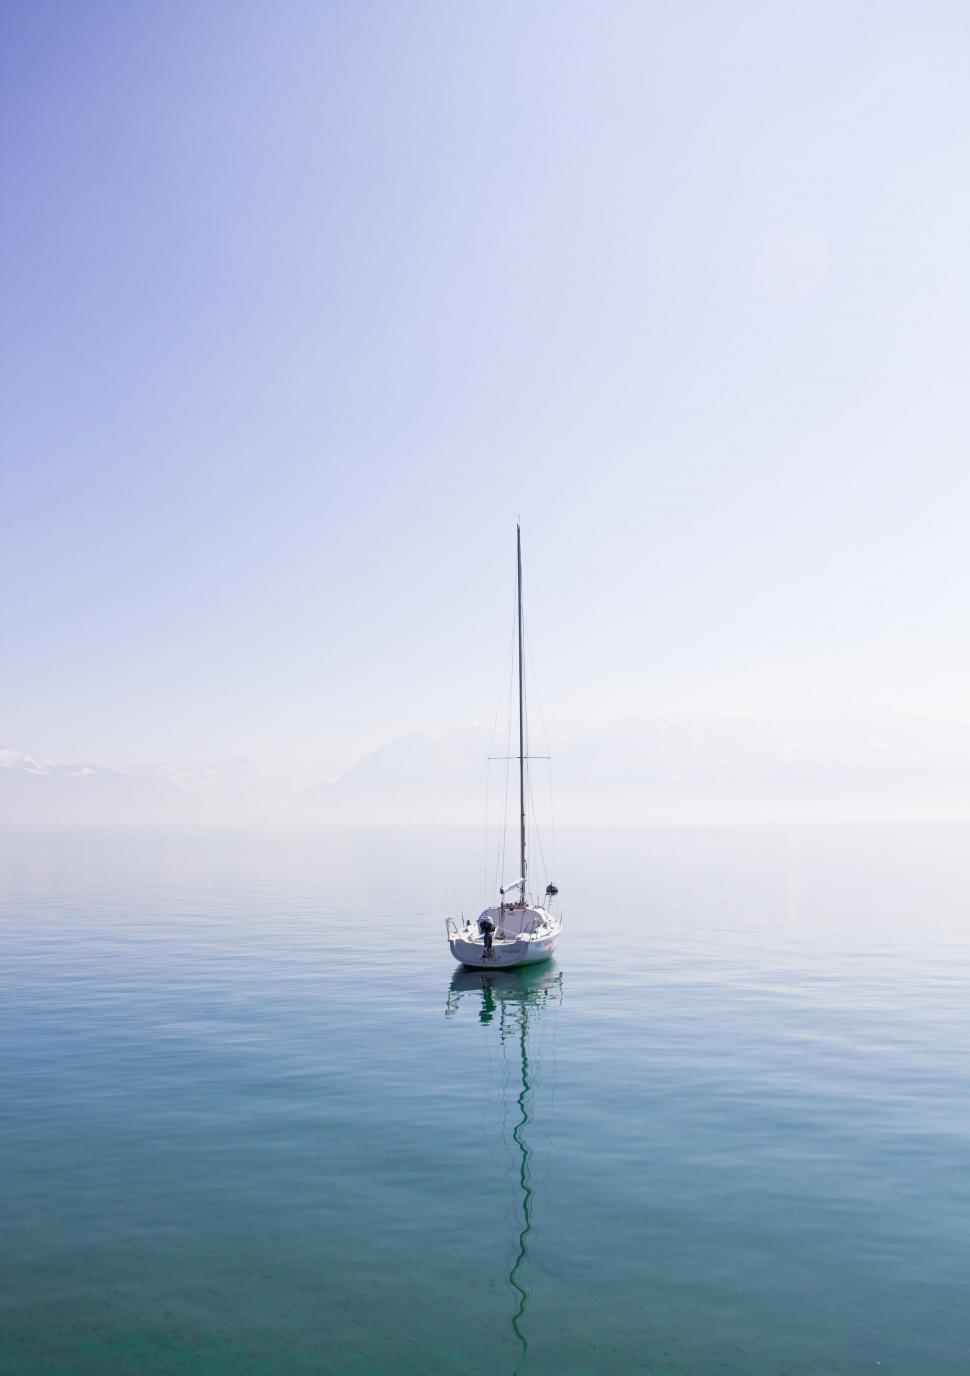 Free Image of Sailboat Drifting in Open Ocean 